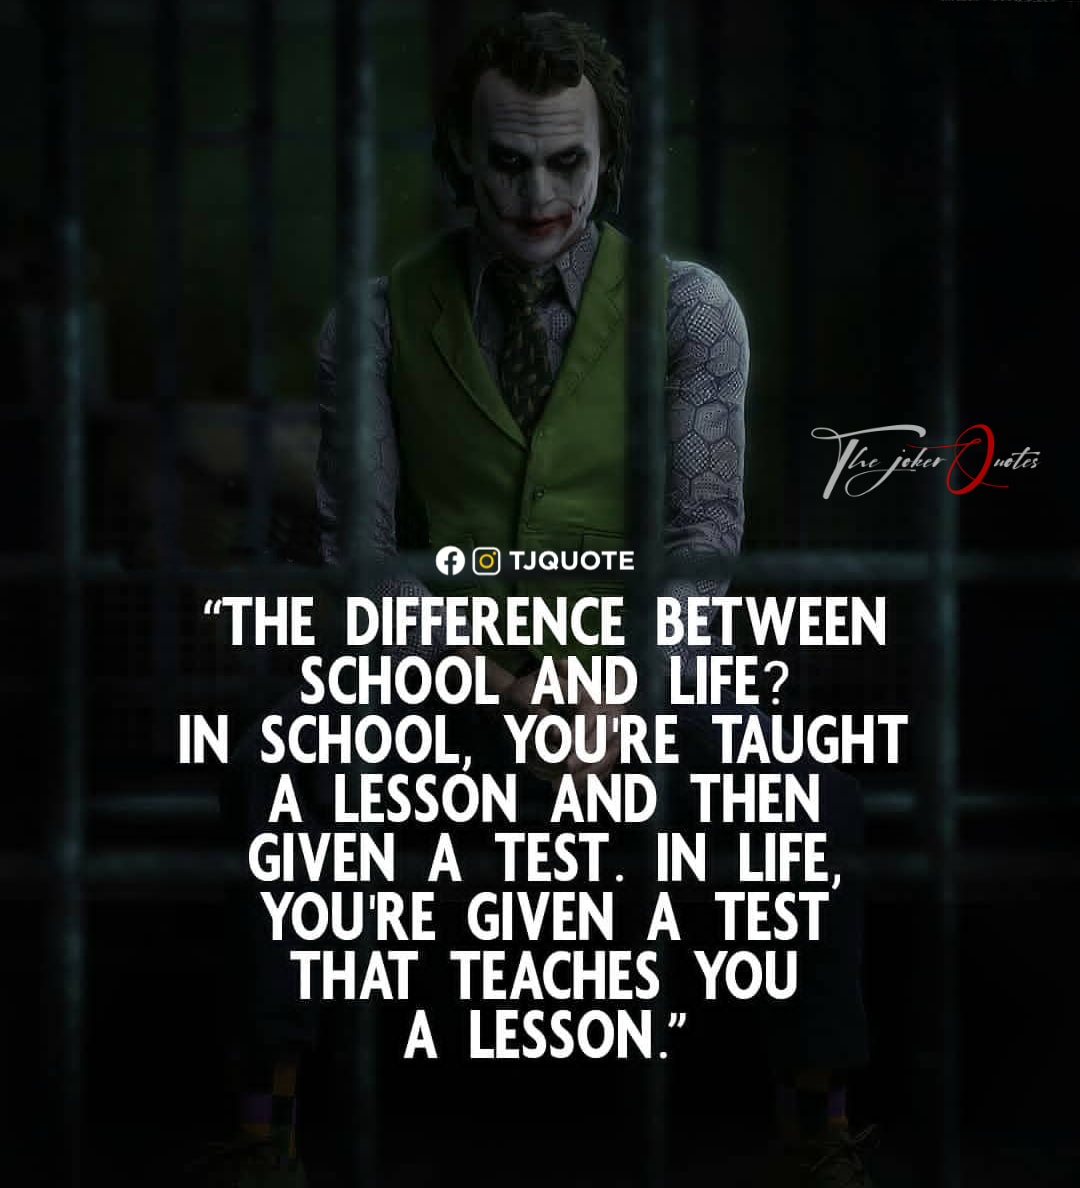 The difference between school and life? In school, you’re taught a lesson and then given a test. In life, you’re given a test that teaches you a lesson